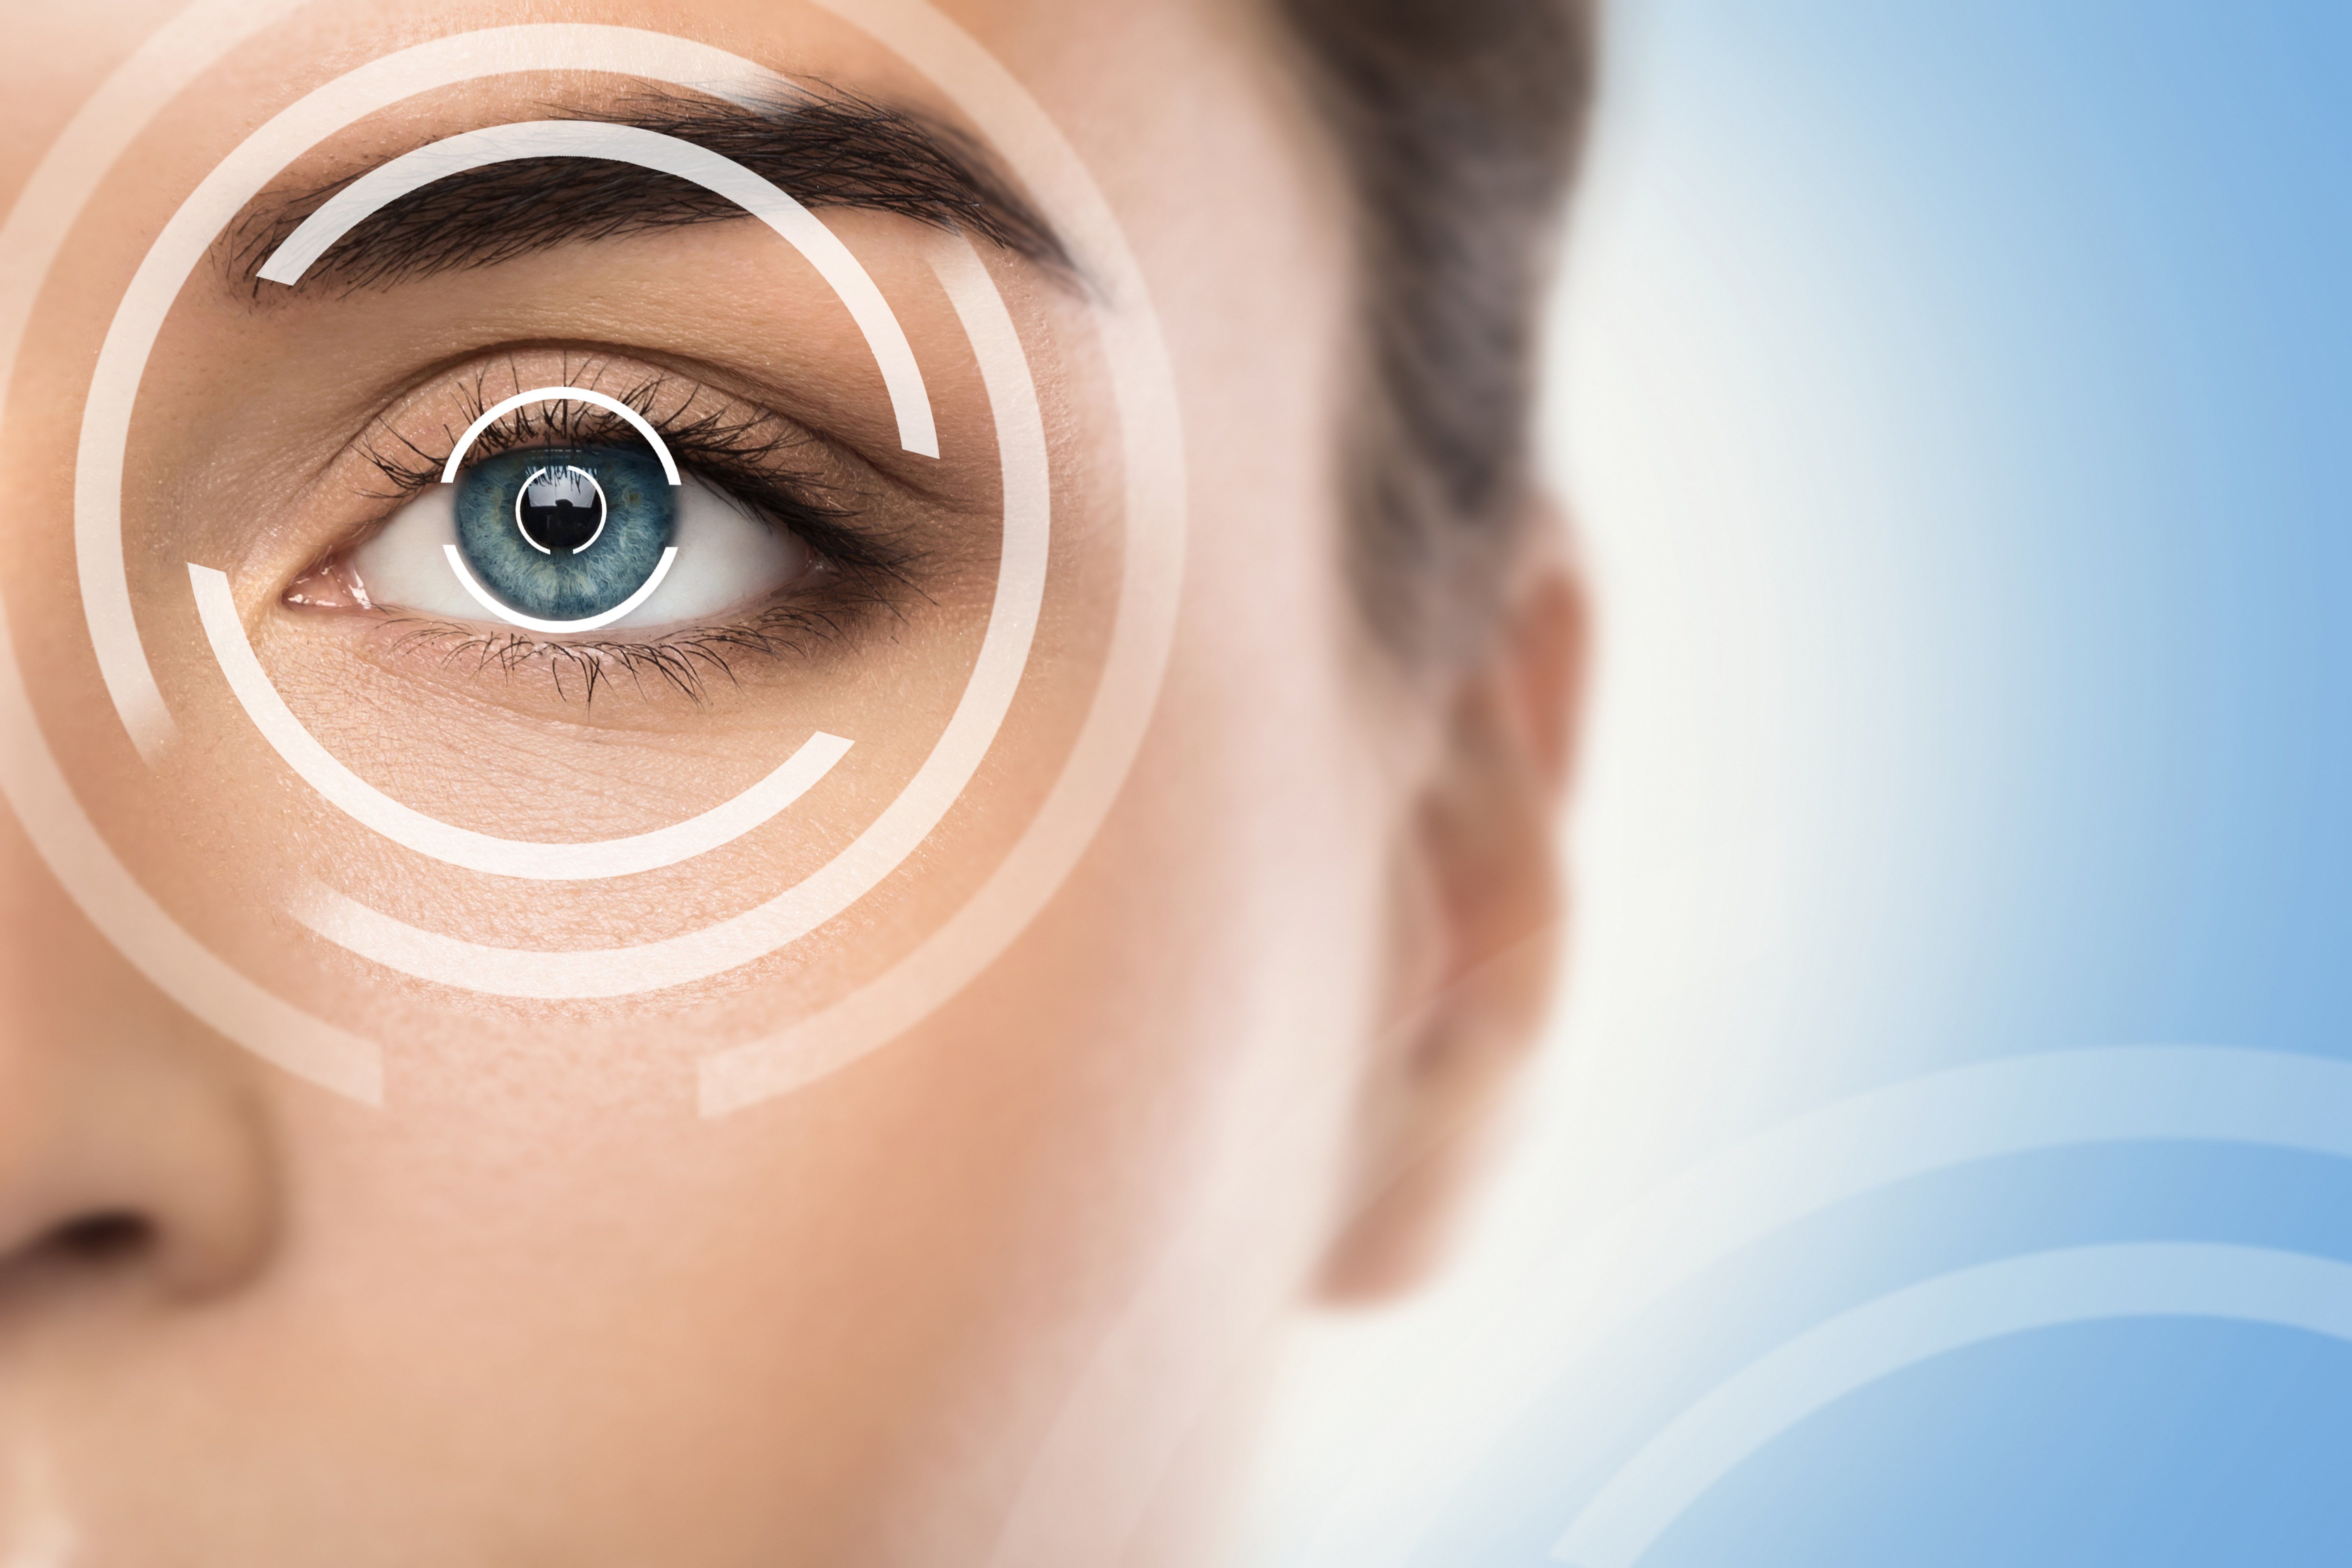 Are You a Candidate for LASIK?